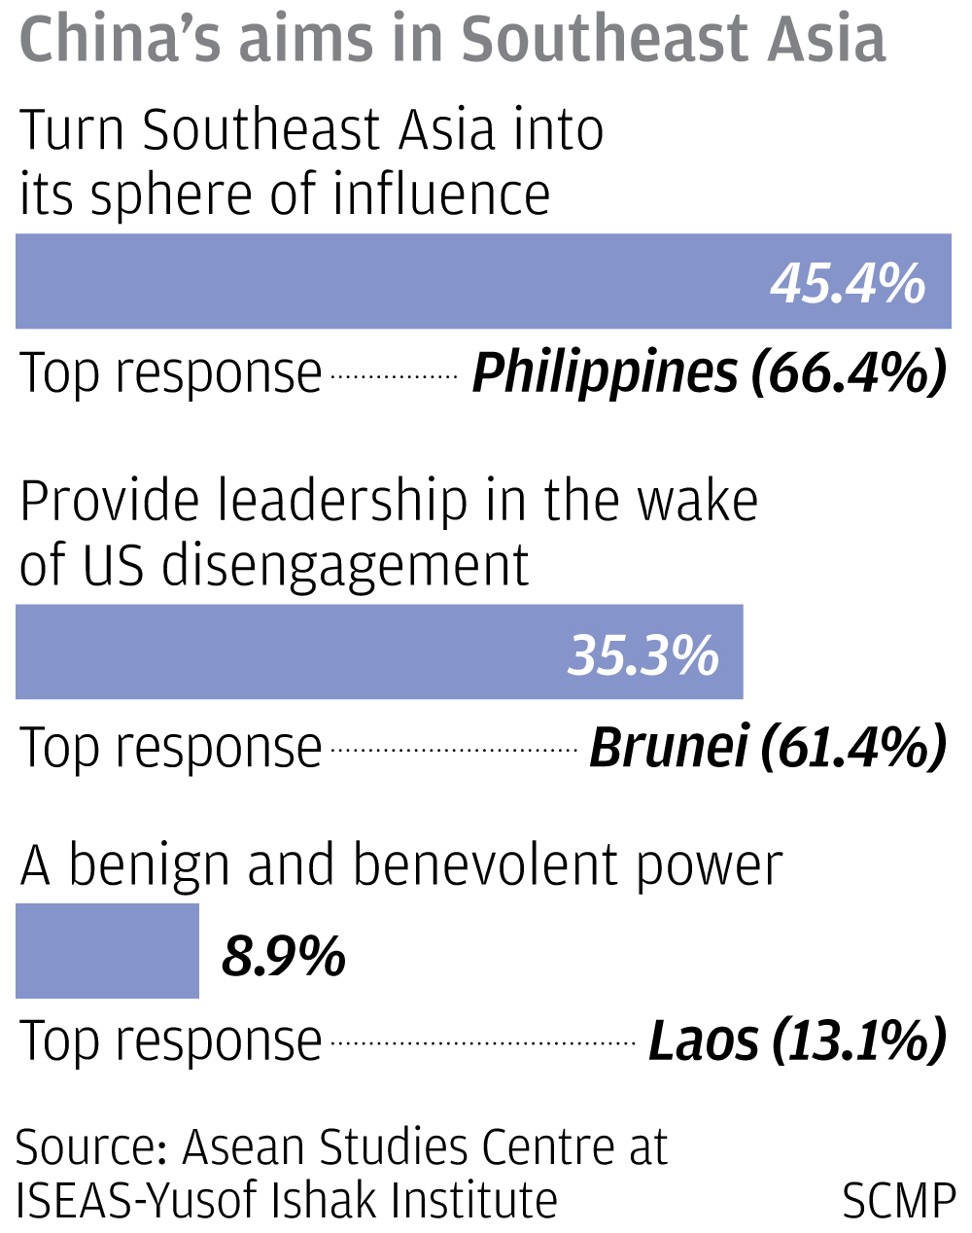 A poll of more than 1,000 Southeast Asian experts, analysts and business leaders laid bare the concerns of a region still trying to find its way amid the rise of China. SCMP Graphics